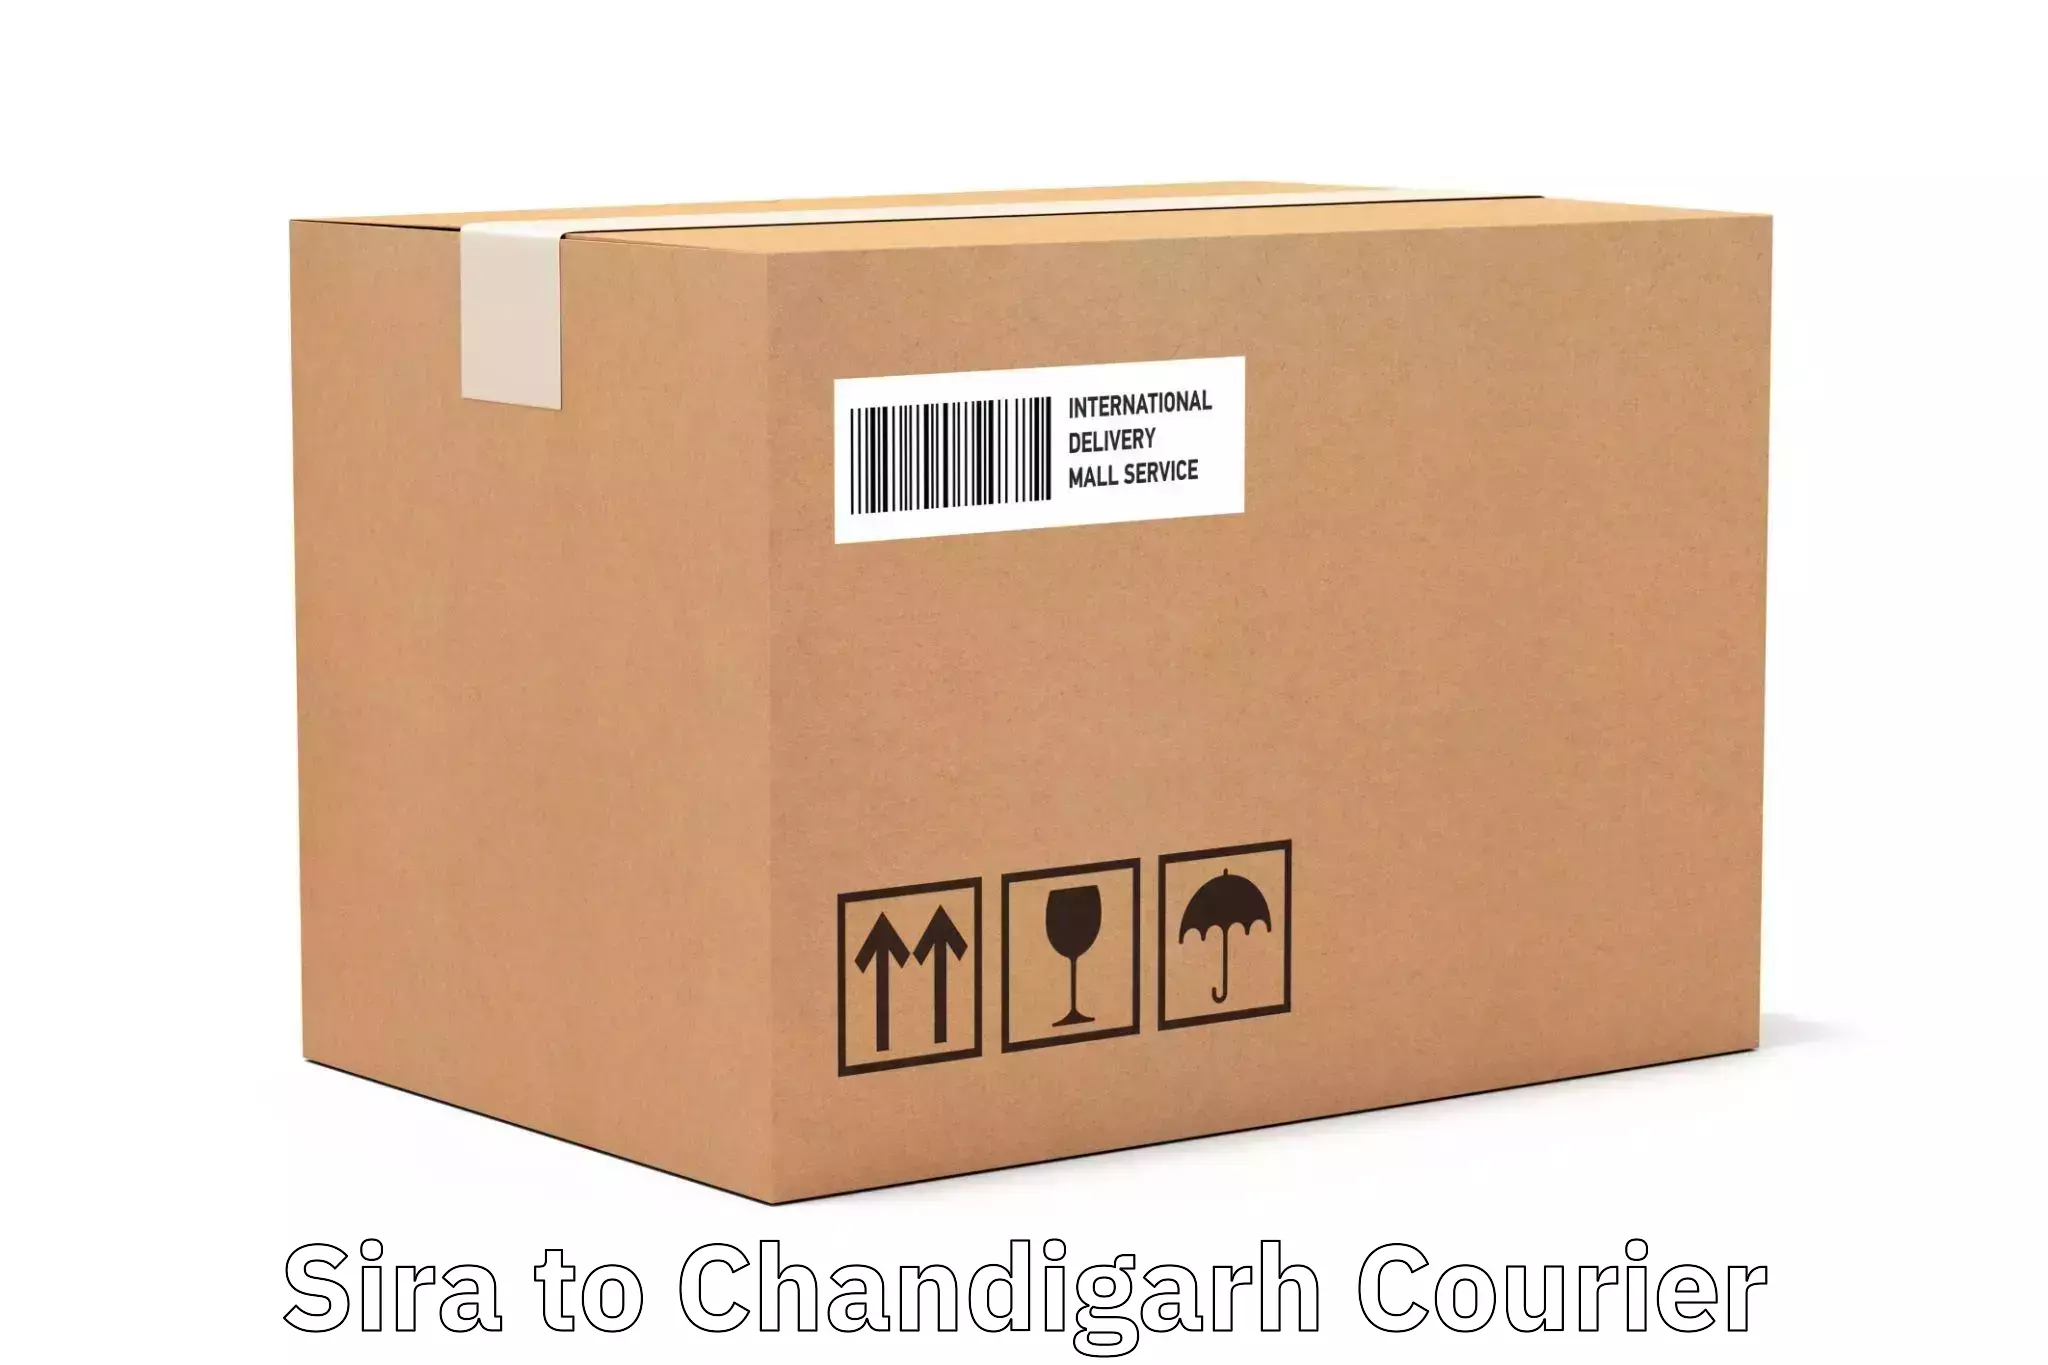 Enhanced tracking features Sira to Chandigarh